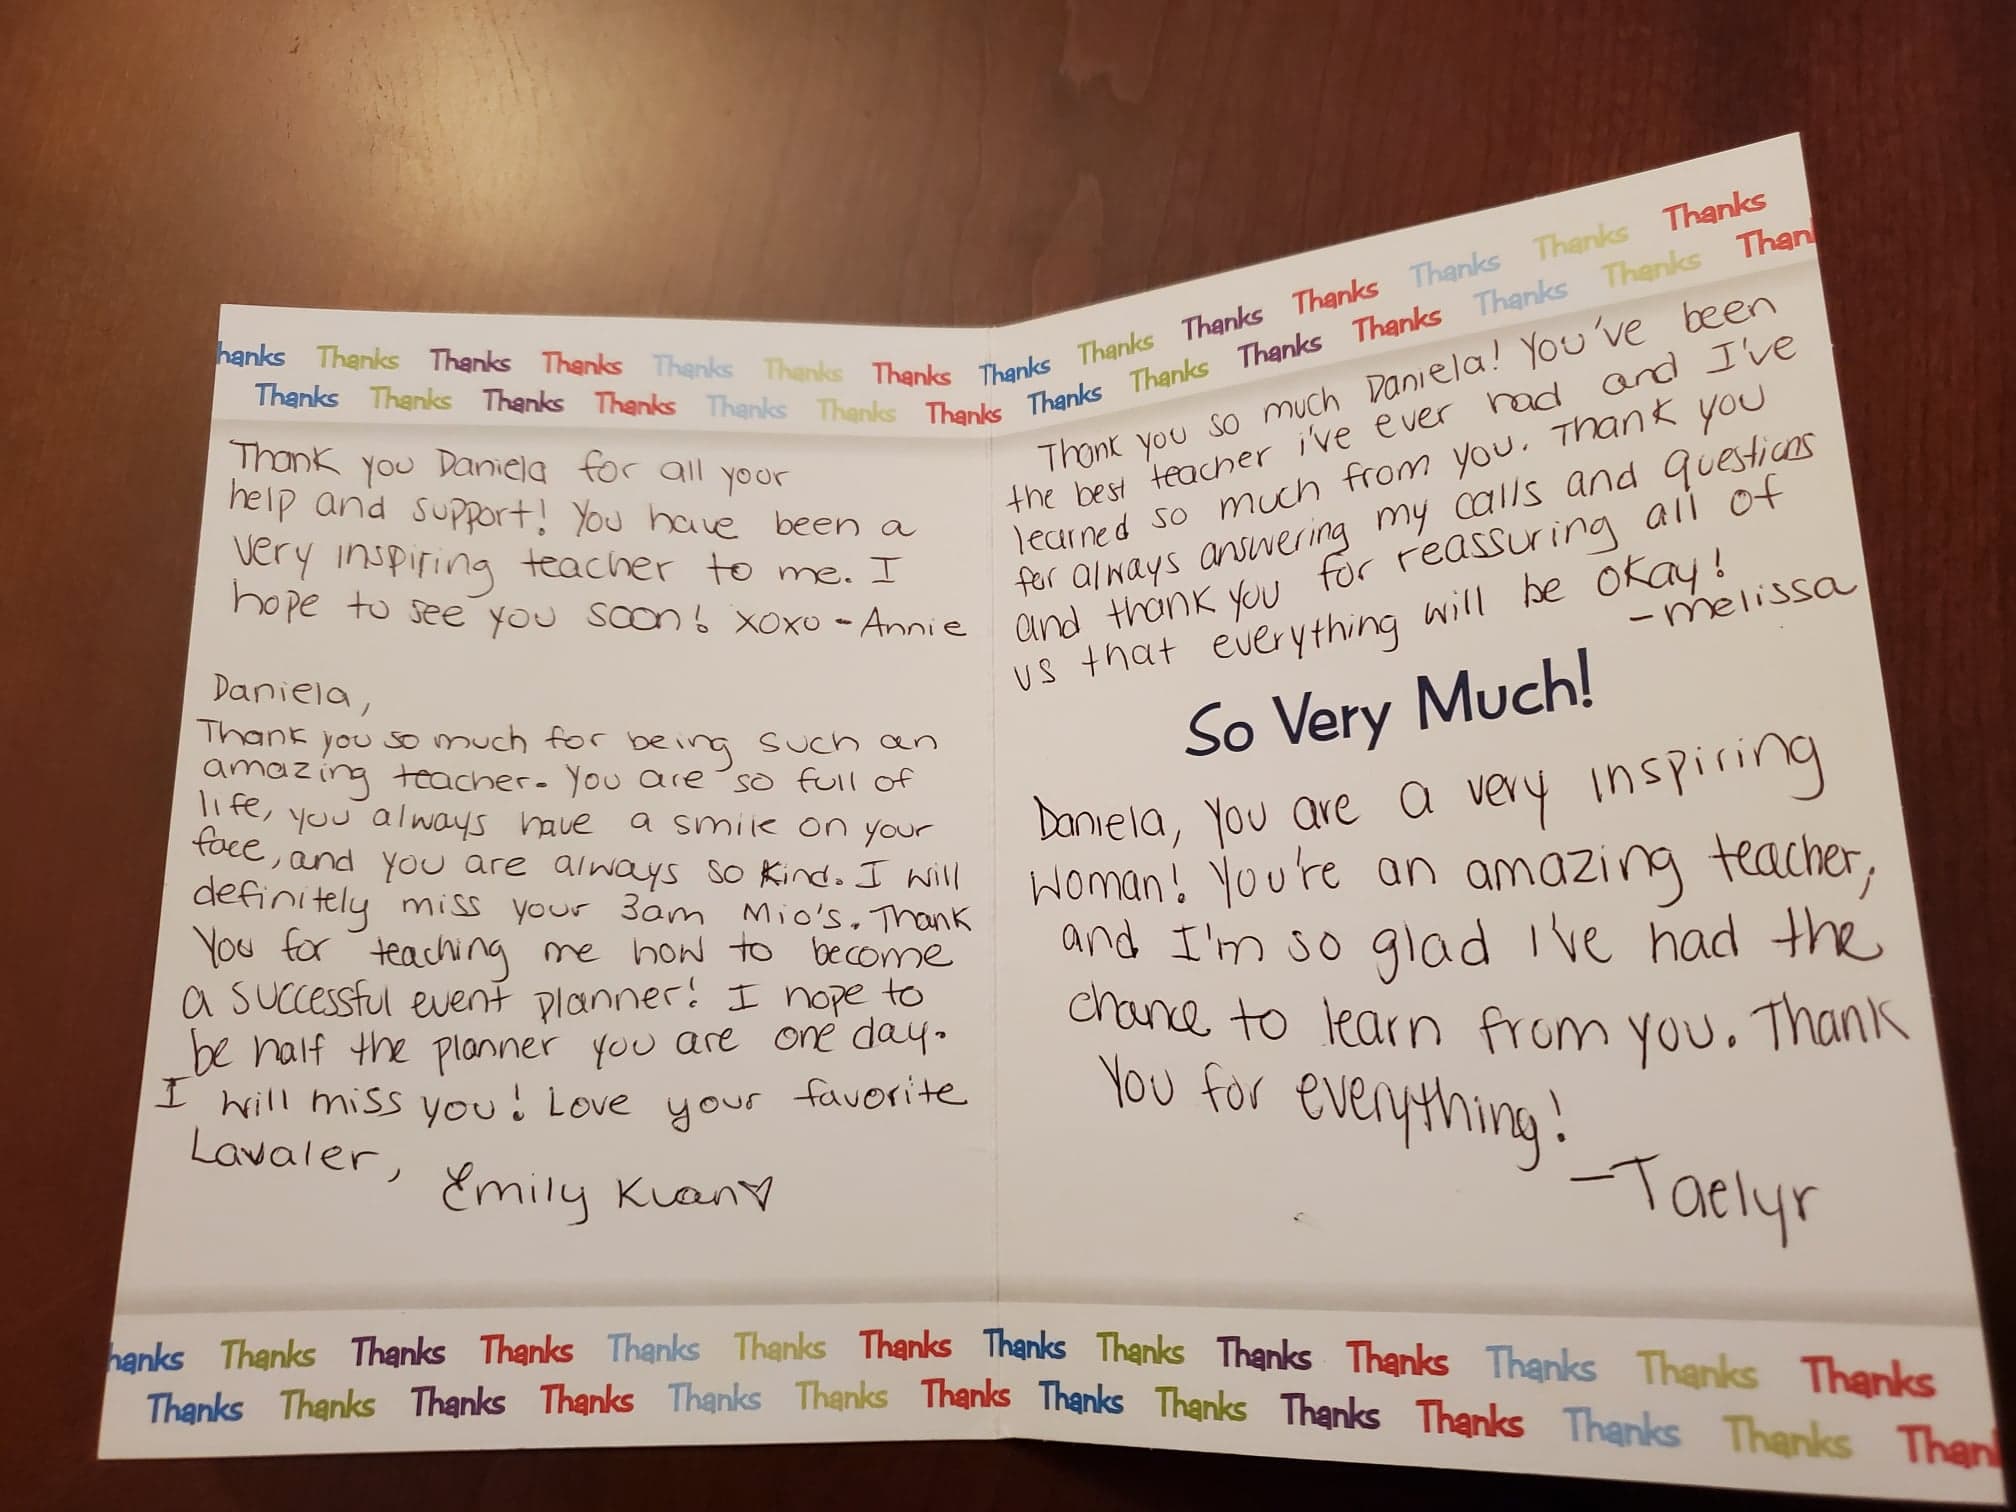 thank-you-note-to-daniela-caputo-from-students